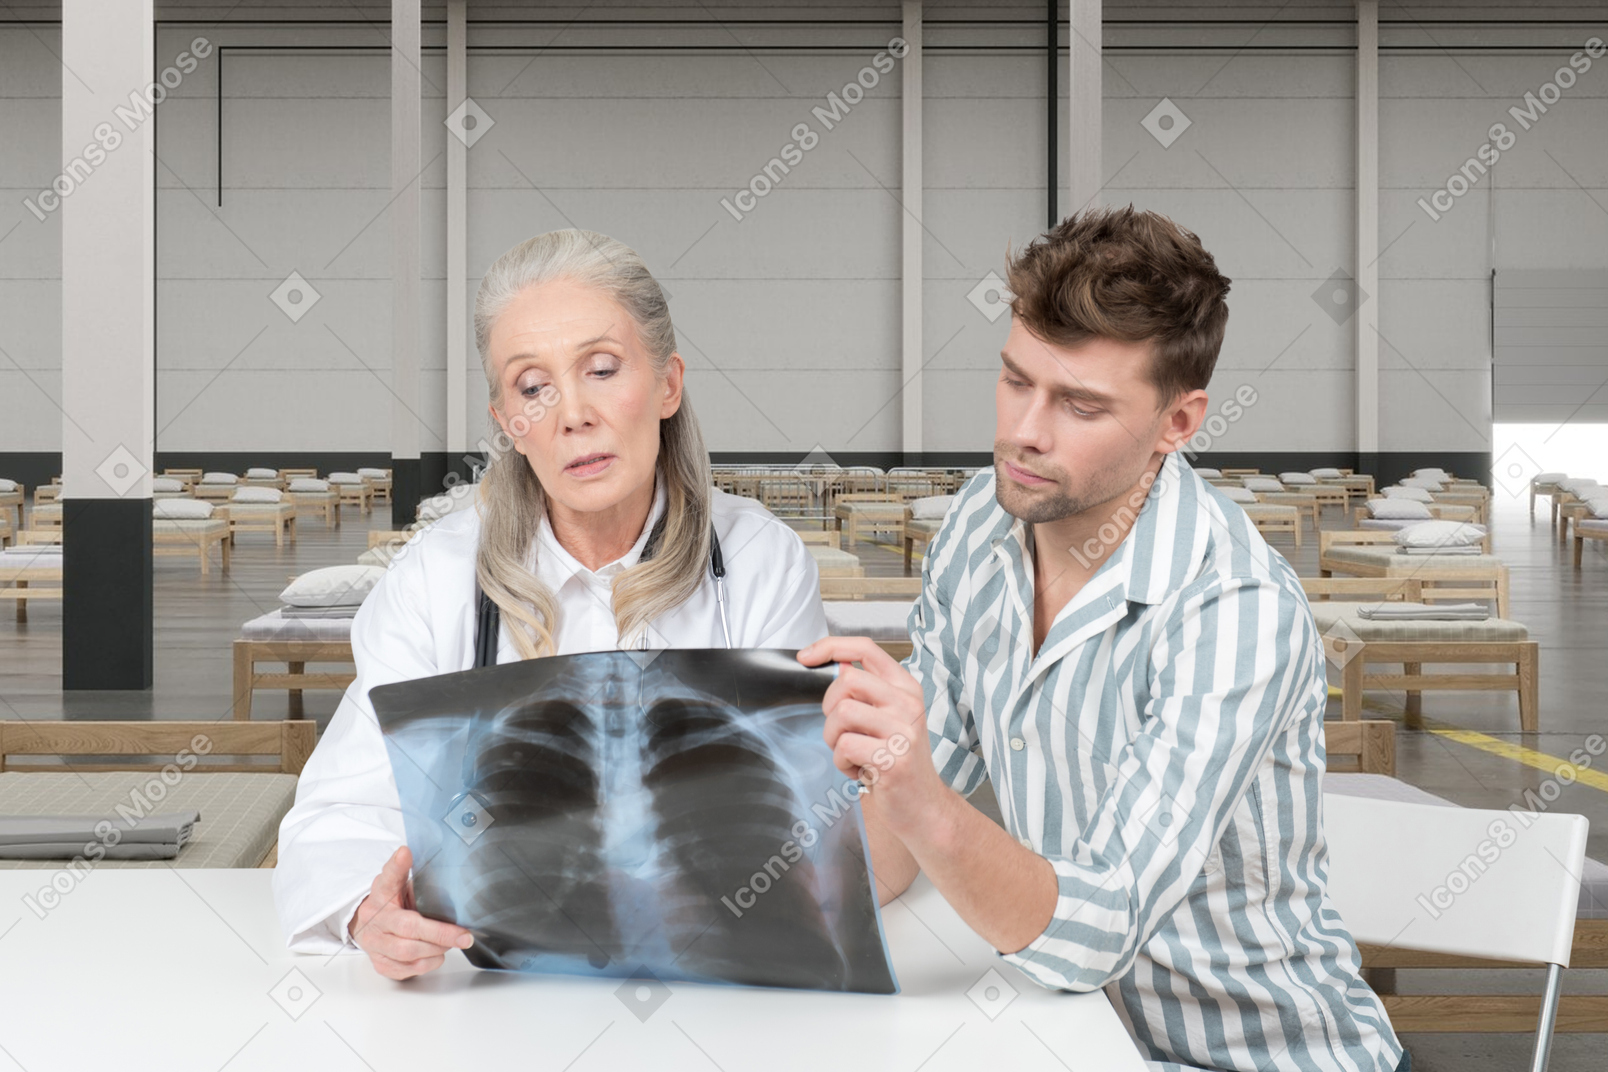 Female doctor and male patient looking at x-ray